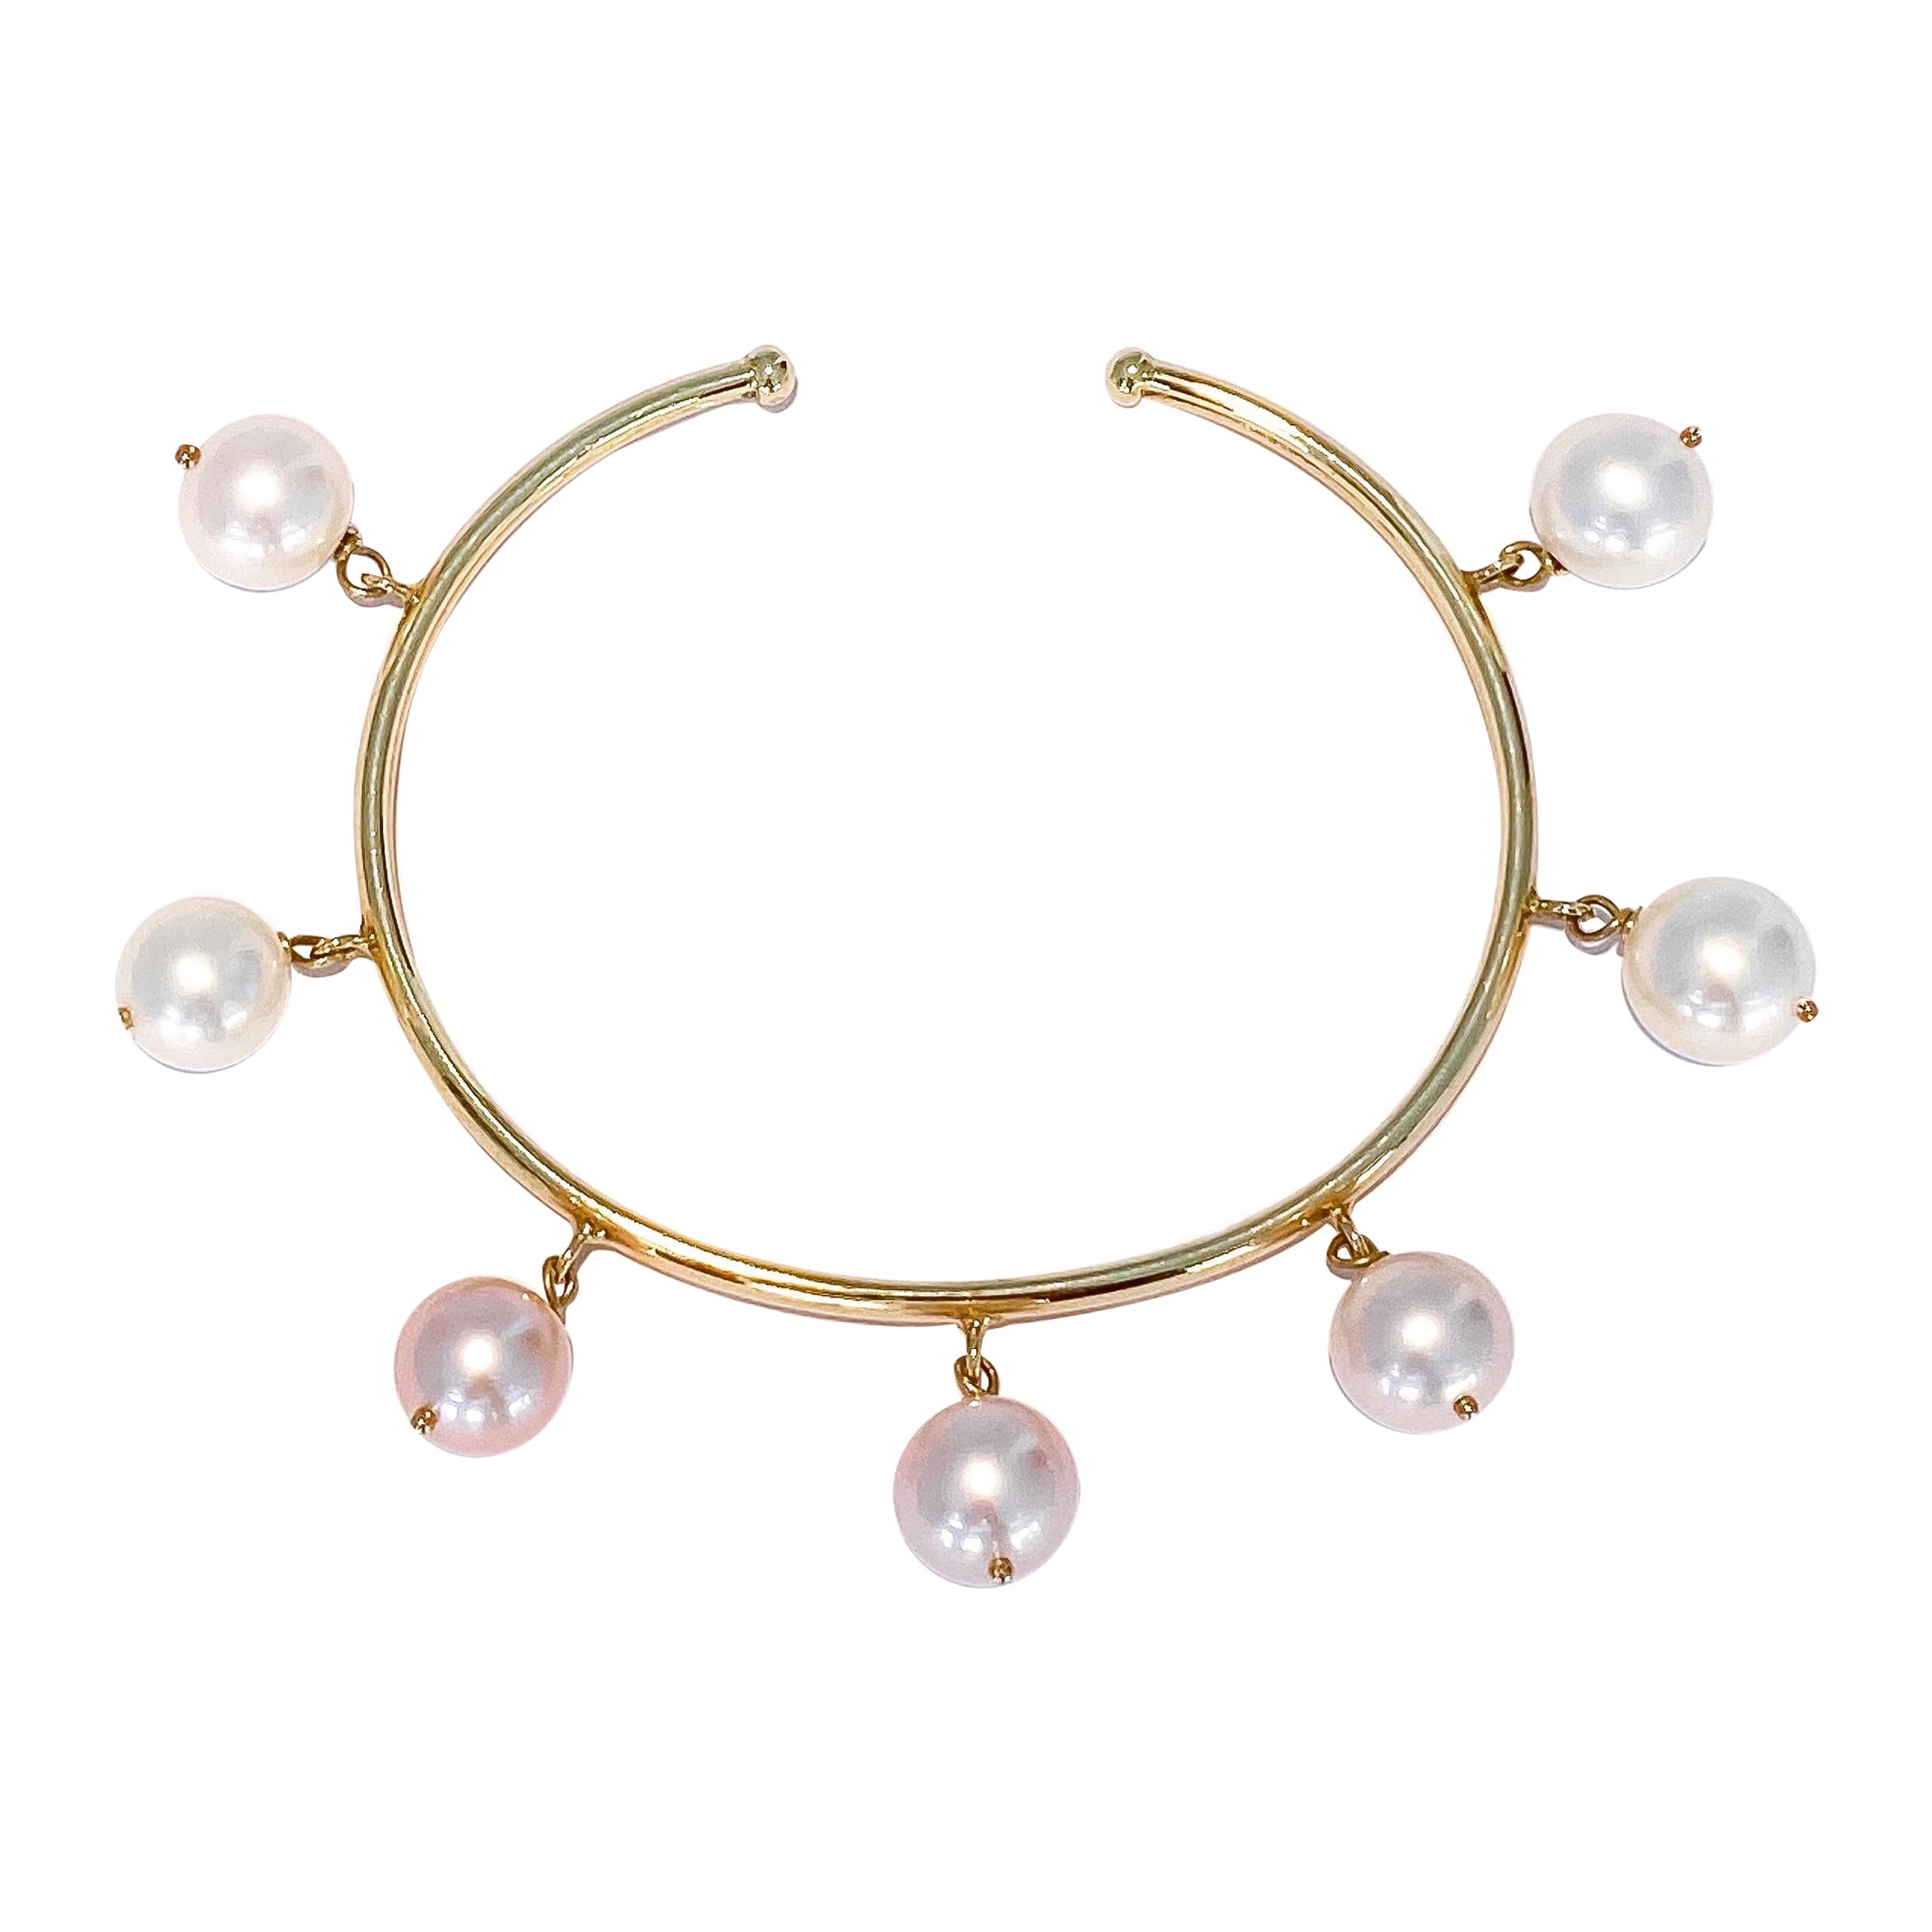 Maria Kotsoni, Contemporary 18 Kt Yellow Gold, Fresh Water Pearl Flexible Cuff For Sale